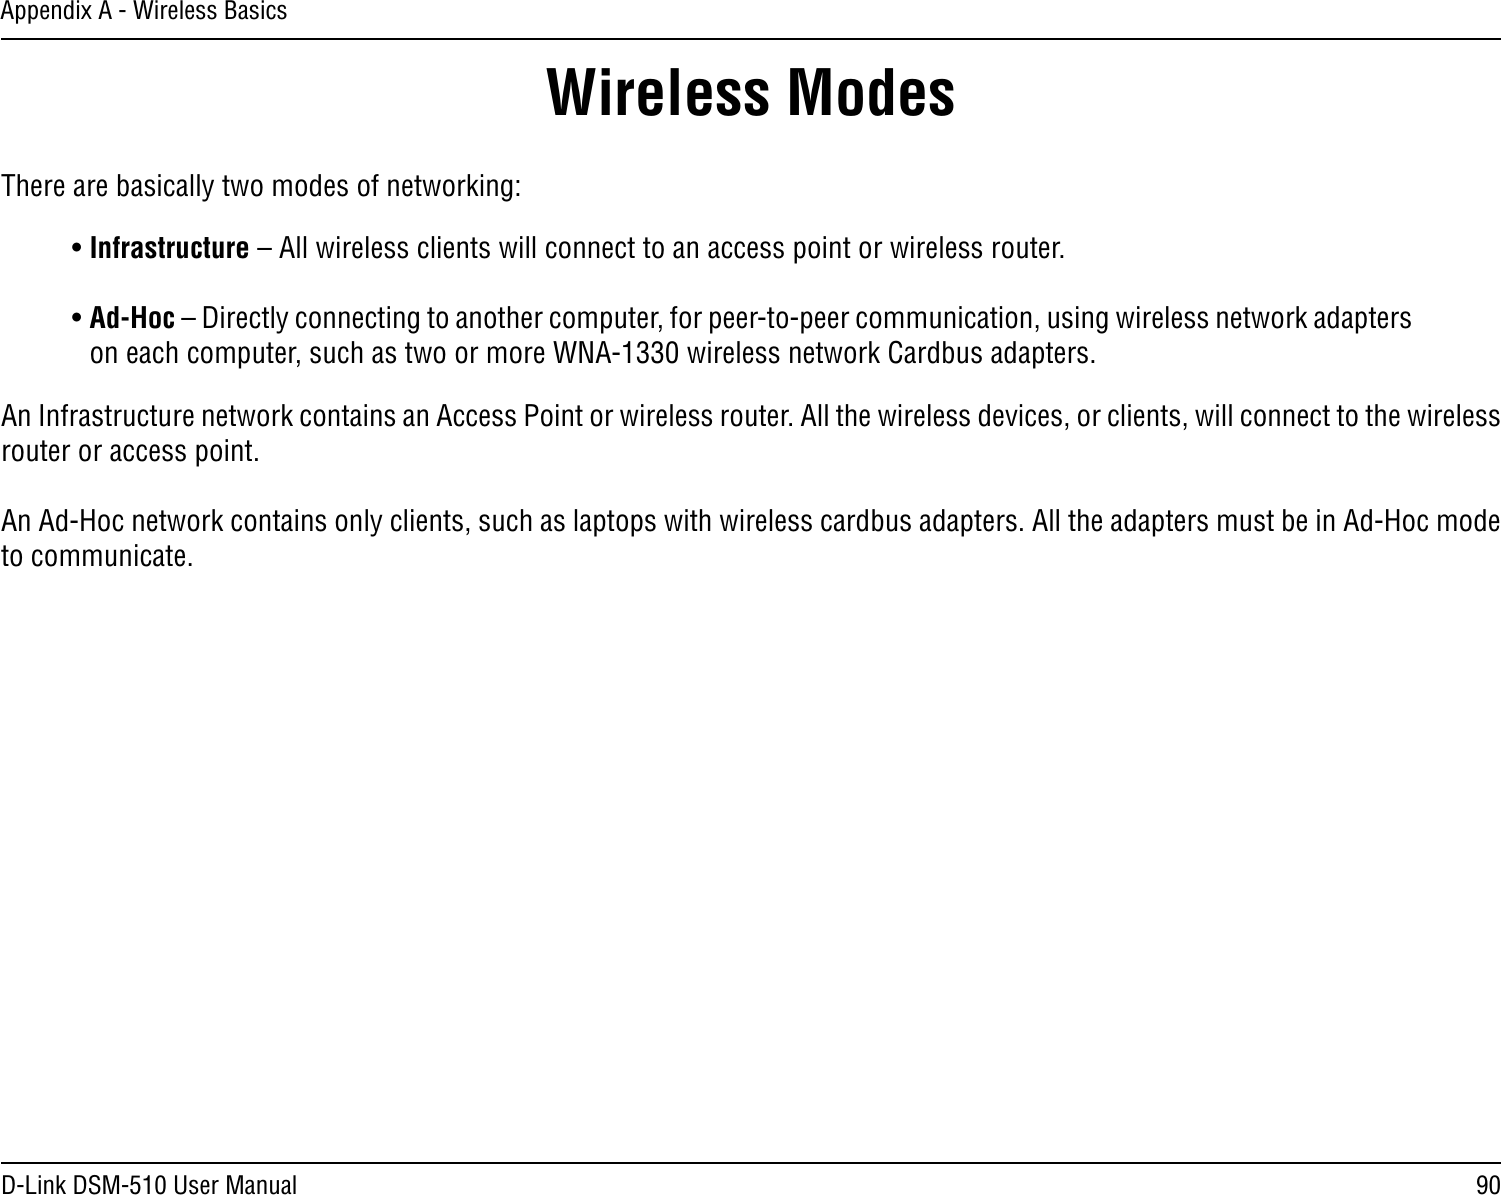 90D-Link DSM-510 User ManualAppendix A - Wireless BasicsThere are basically two modes of networking: • Infrastructure – All wireless clients will connect to an access point or wireless router.• Ad-Hoc – Directly connecting to another computer, for peer-to-peer communication, using wireless network adapters on each computer, such as two or more WNA-1330 wireless network Cardbus adapters.An Infrastructure network contains an Access Point or wireless router. All the wireless devices, or clients, will connect to the wireless router or access point. An Ad-Hoc network contains only clients, such as laptops with wireless cardbus adapters. All the adapters must be in Ad-Hoc mode to communicate.Wireless Modes